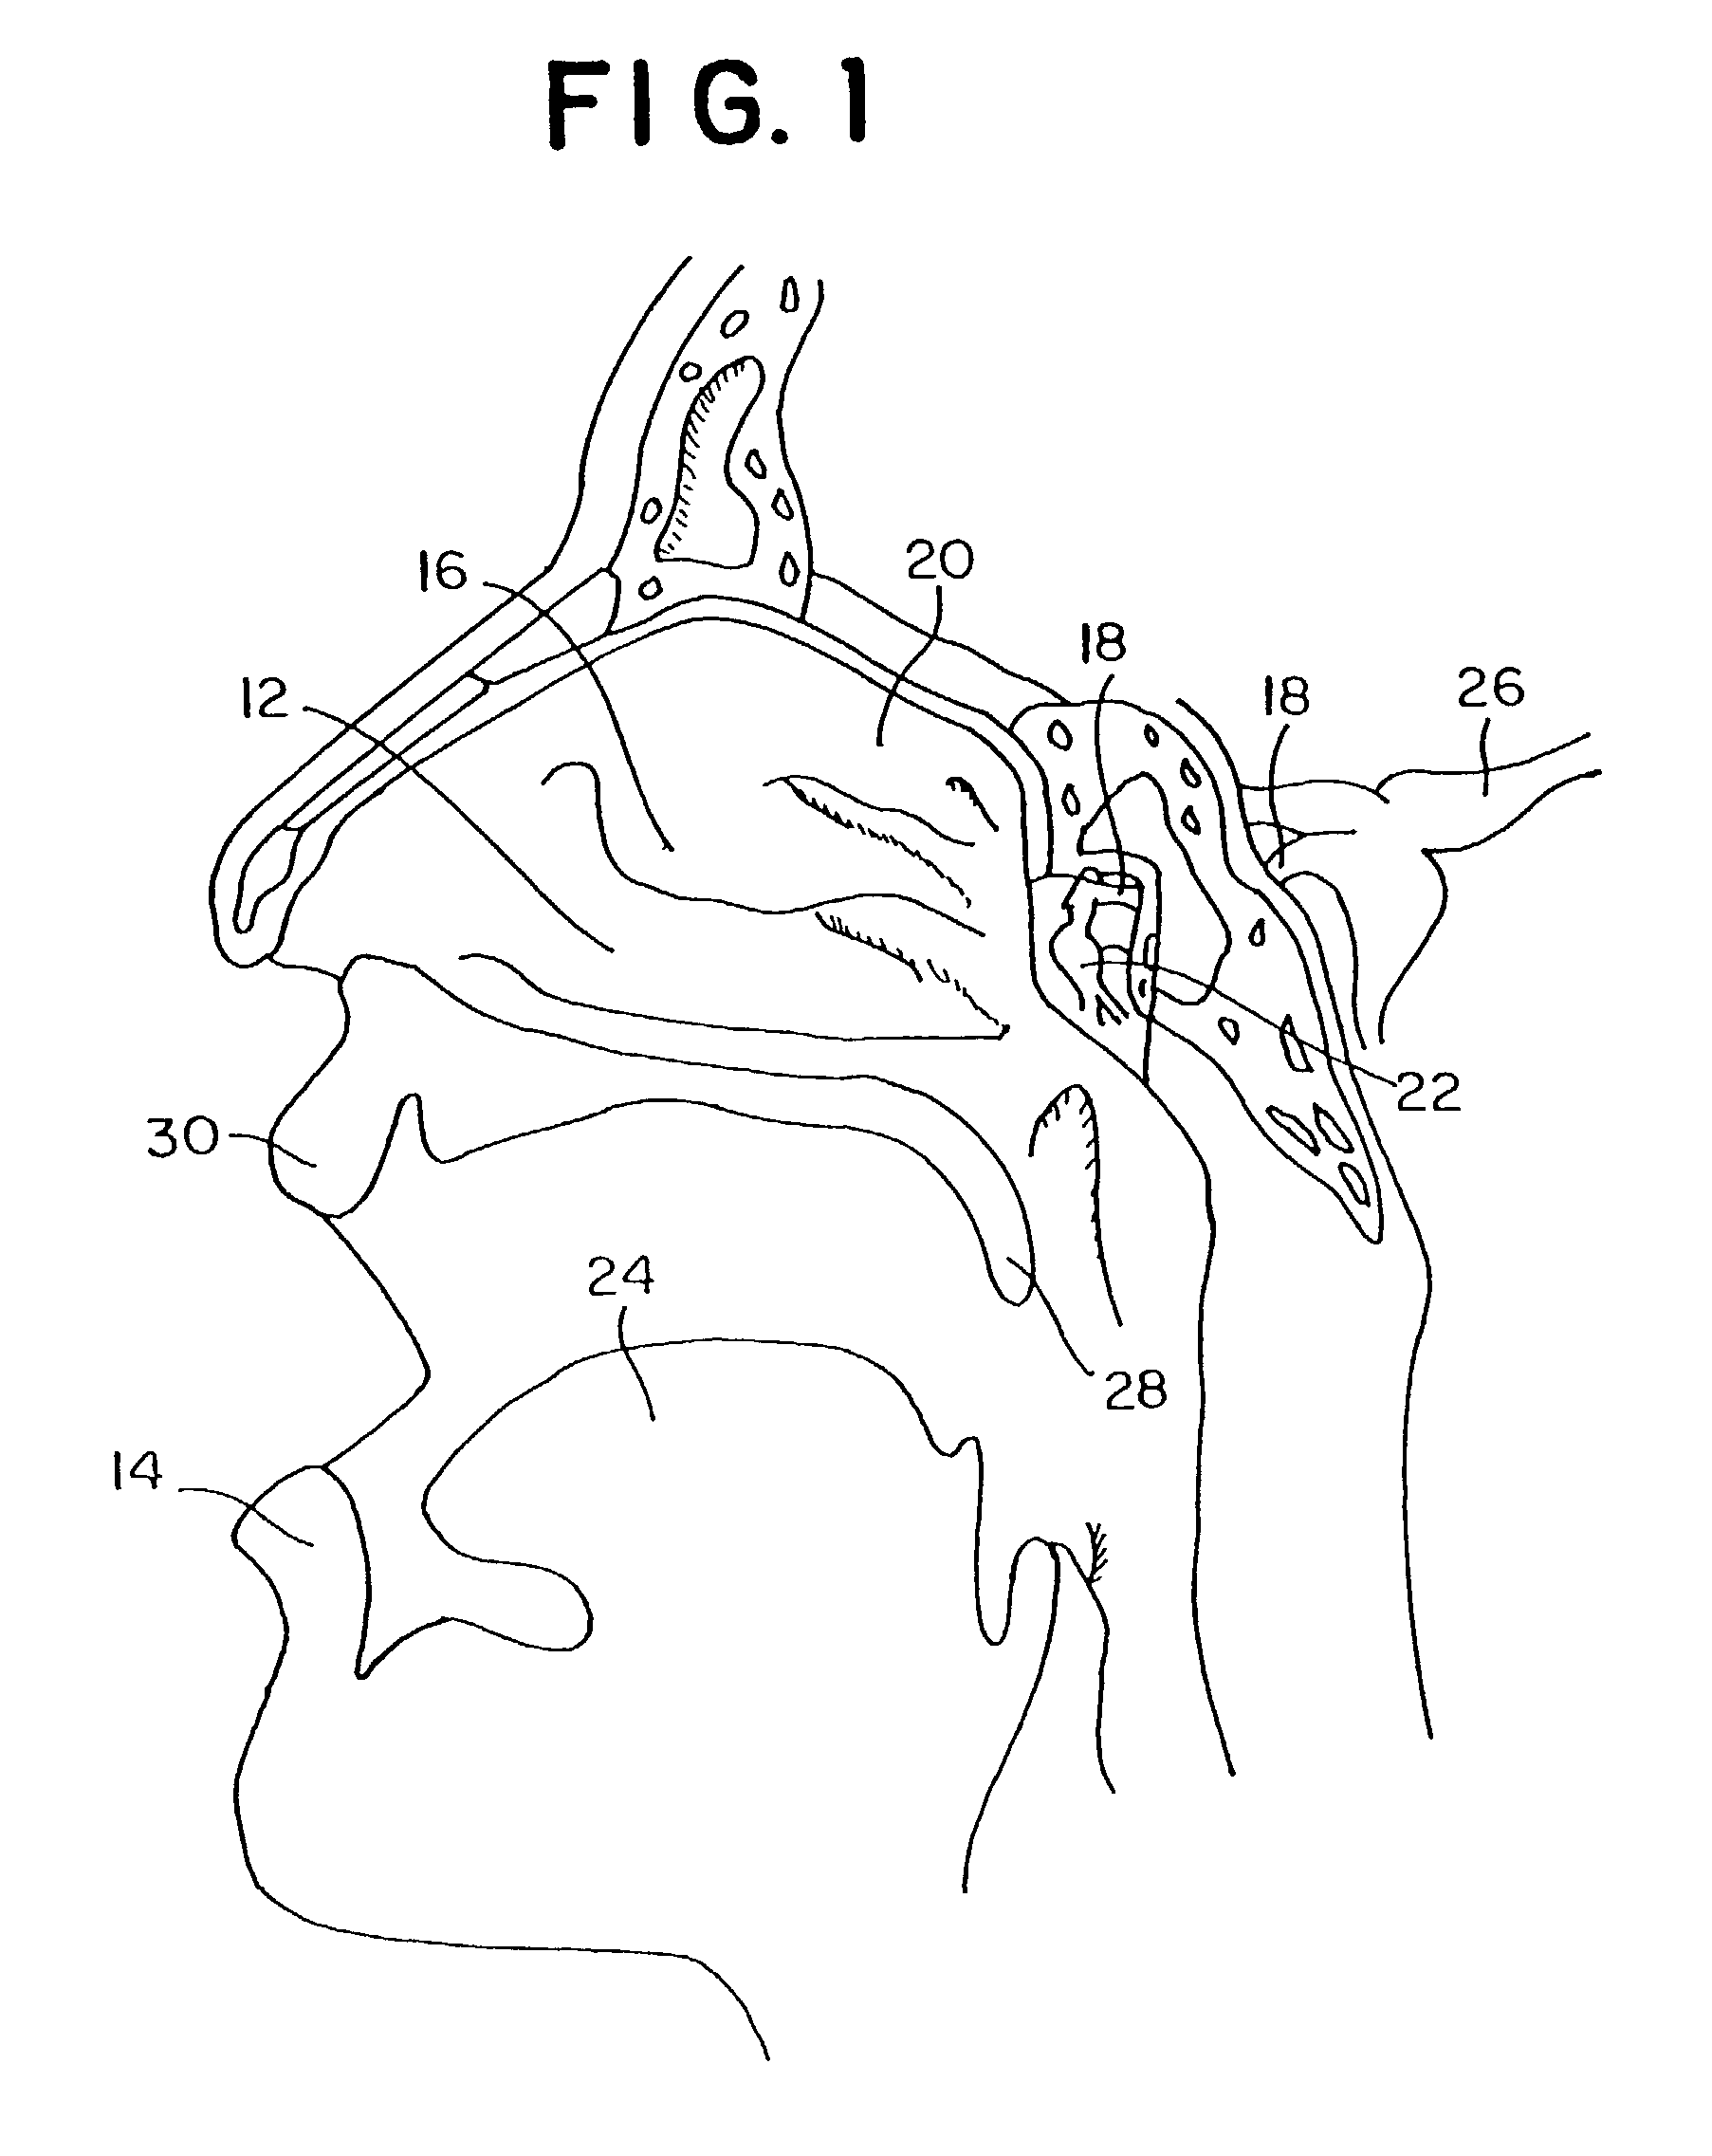 Method for directed intranasal administration of a composition